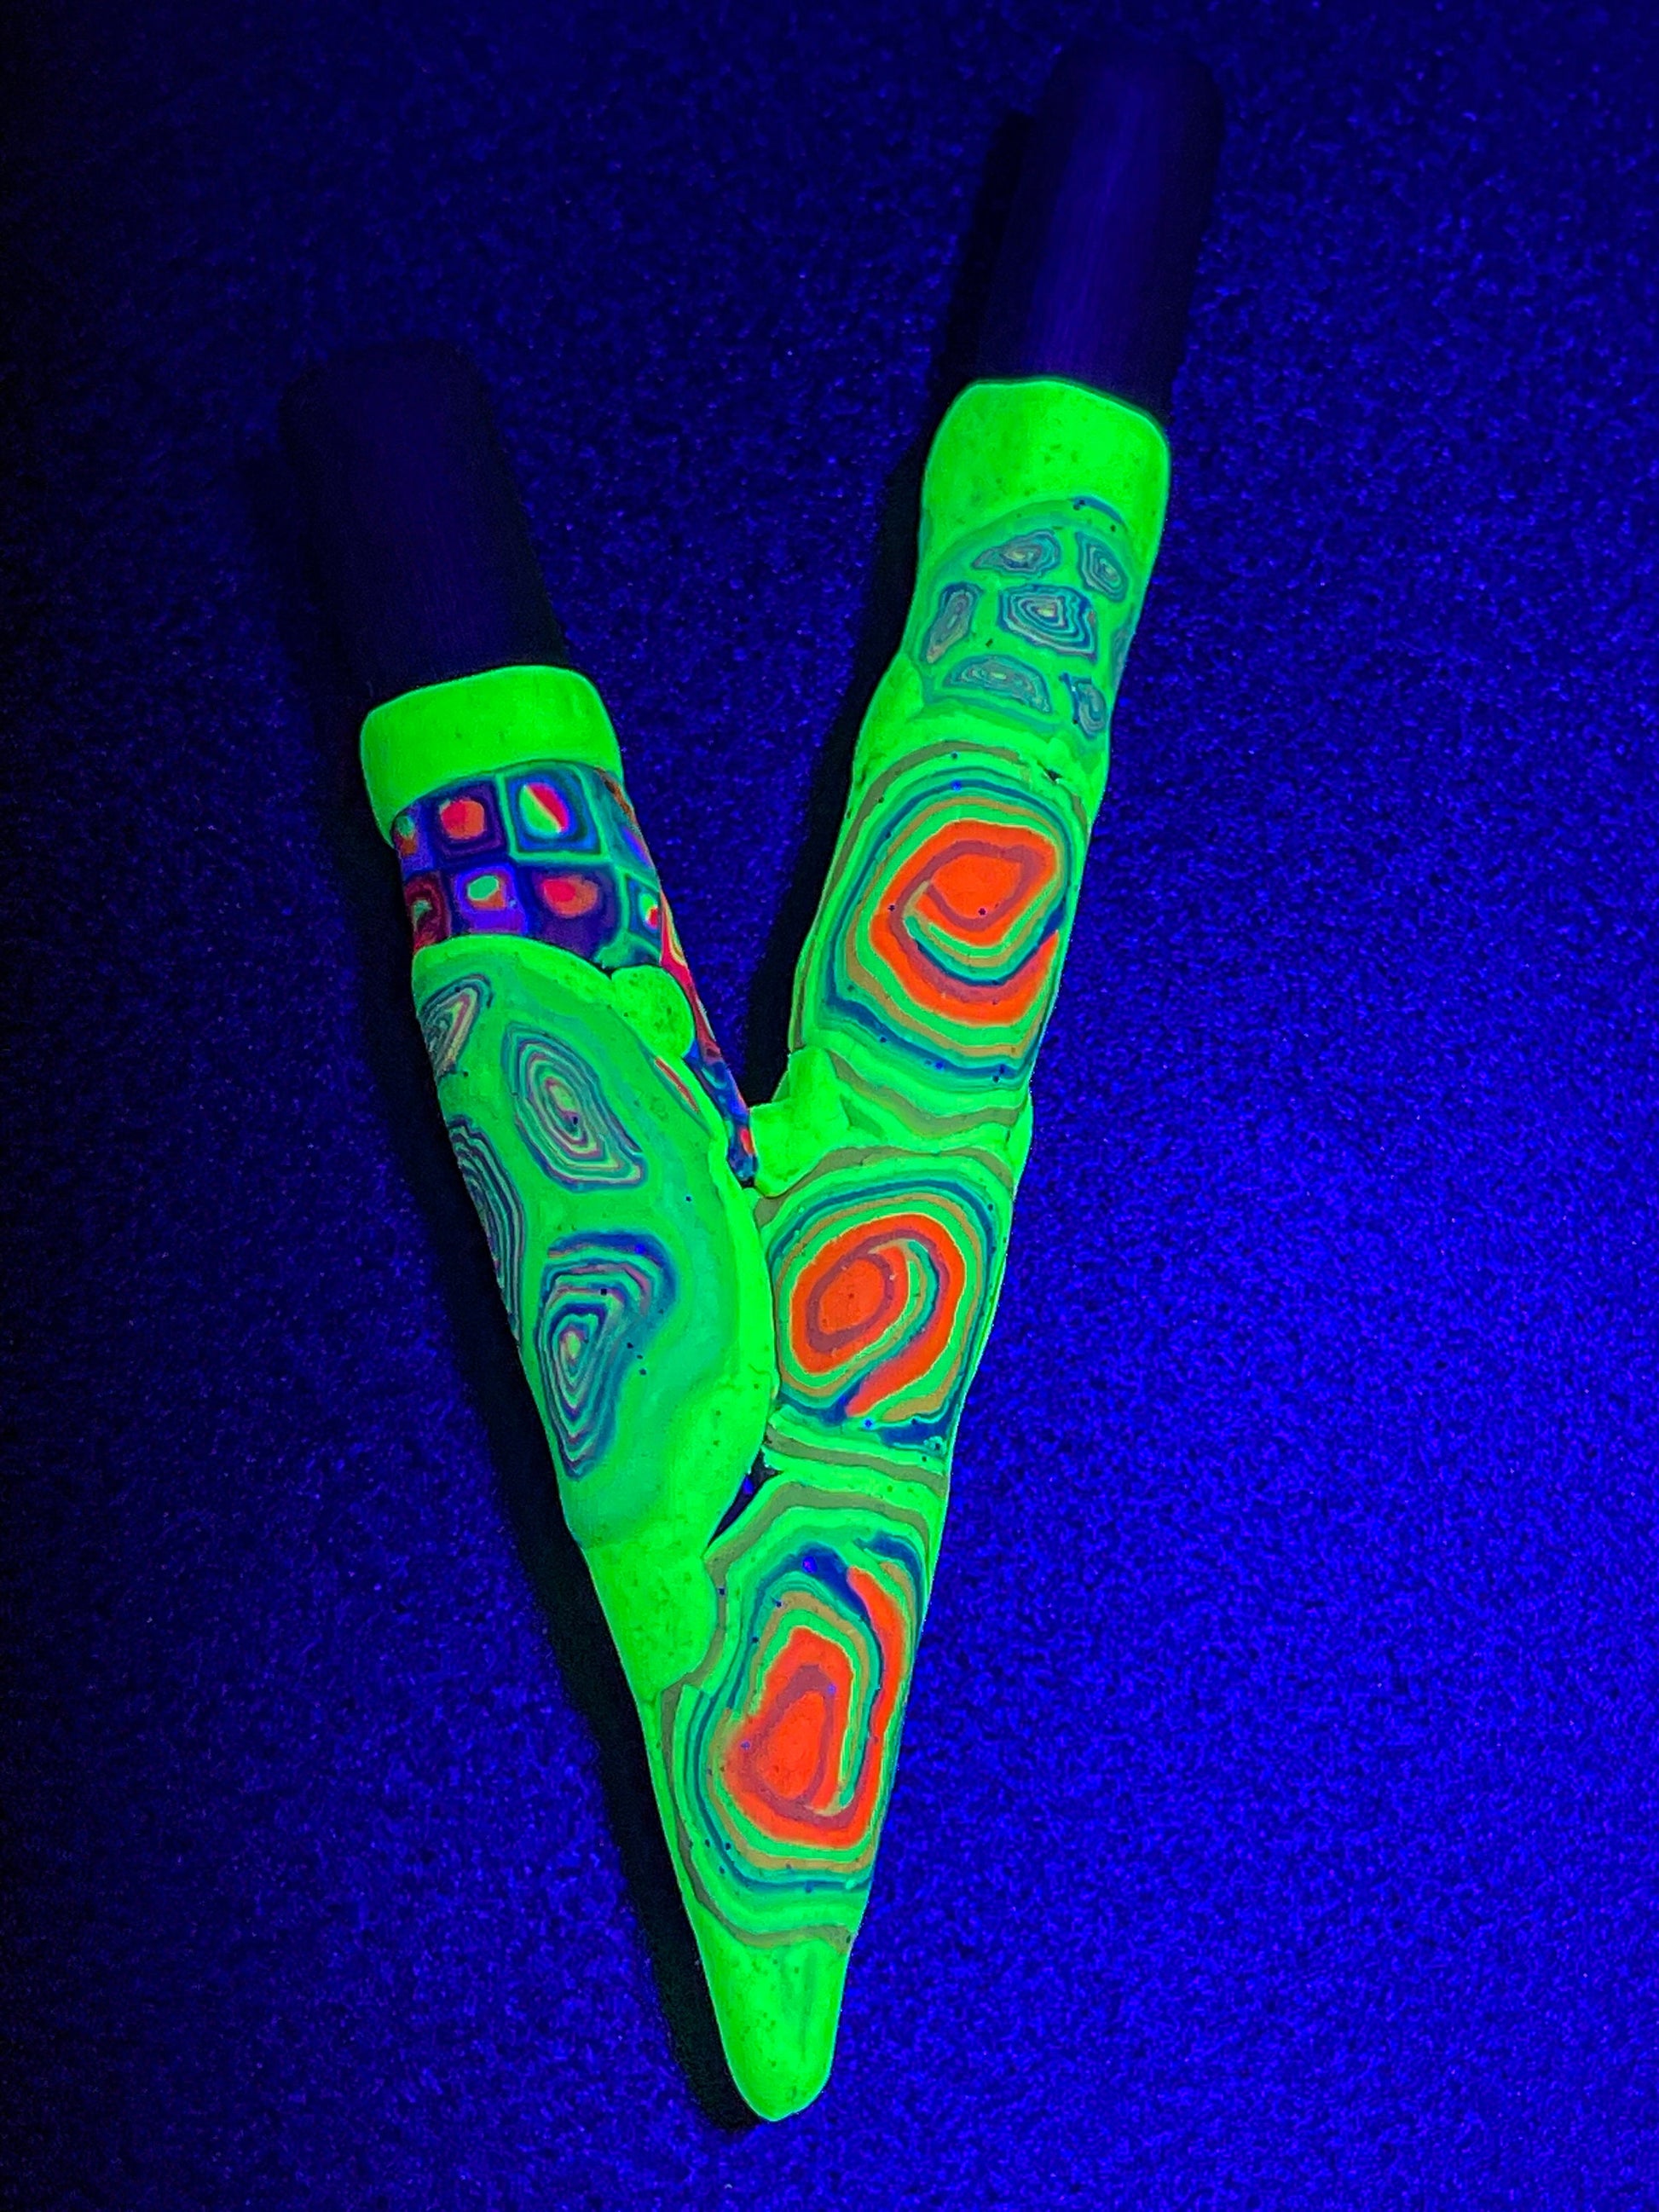 Beautiful Kuripe self applicator - Traditionally for Rapè  - handmade UV glowing polymer clay eye candy psychedelic spiral made with love